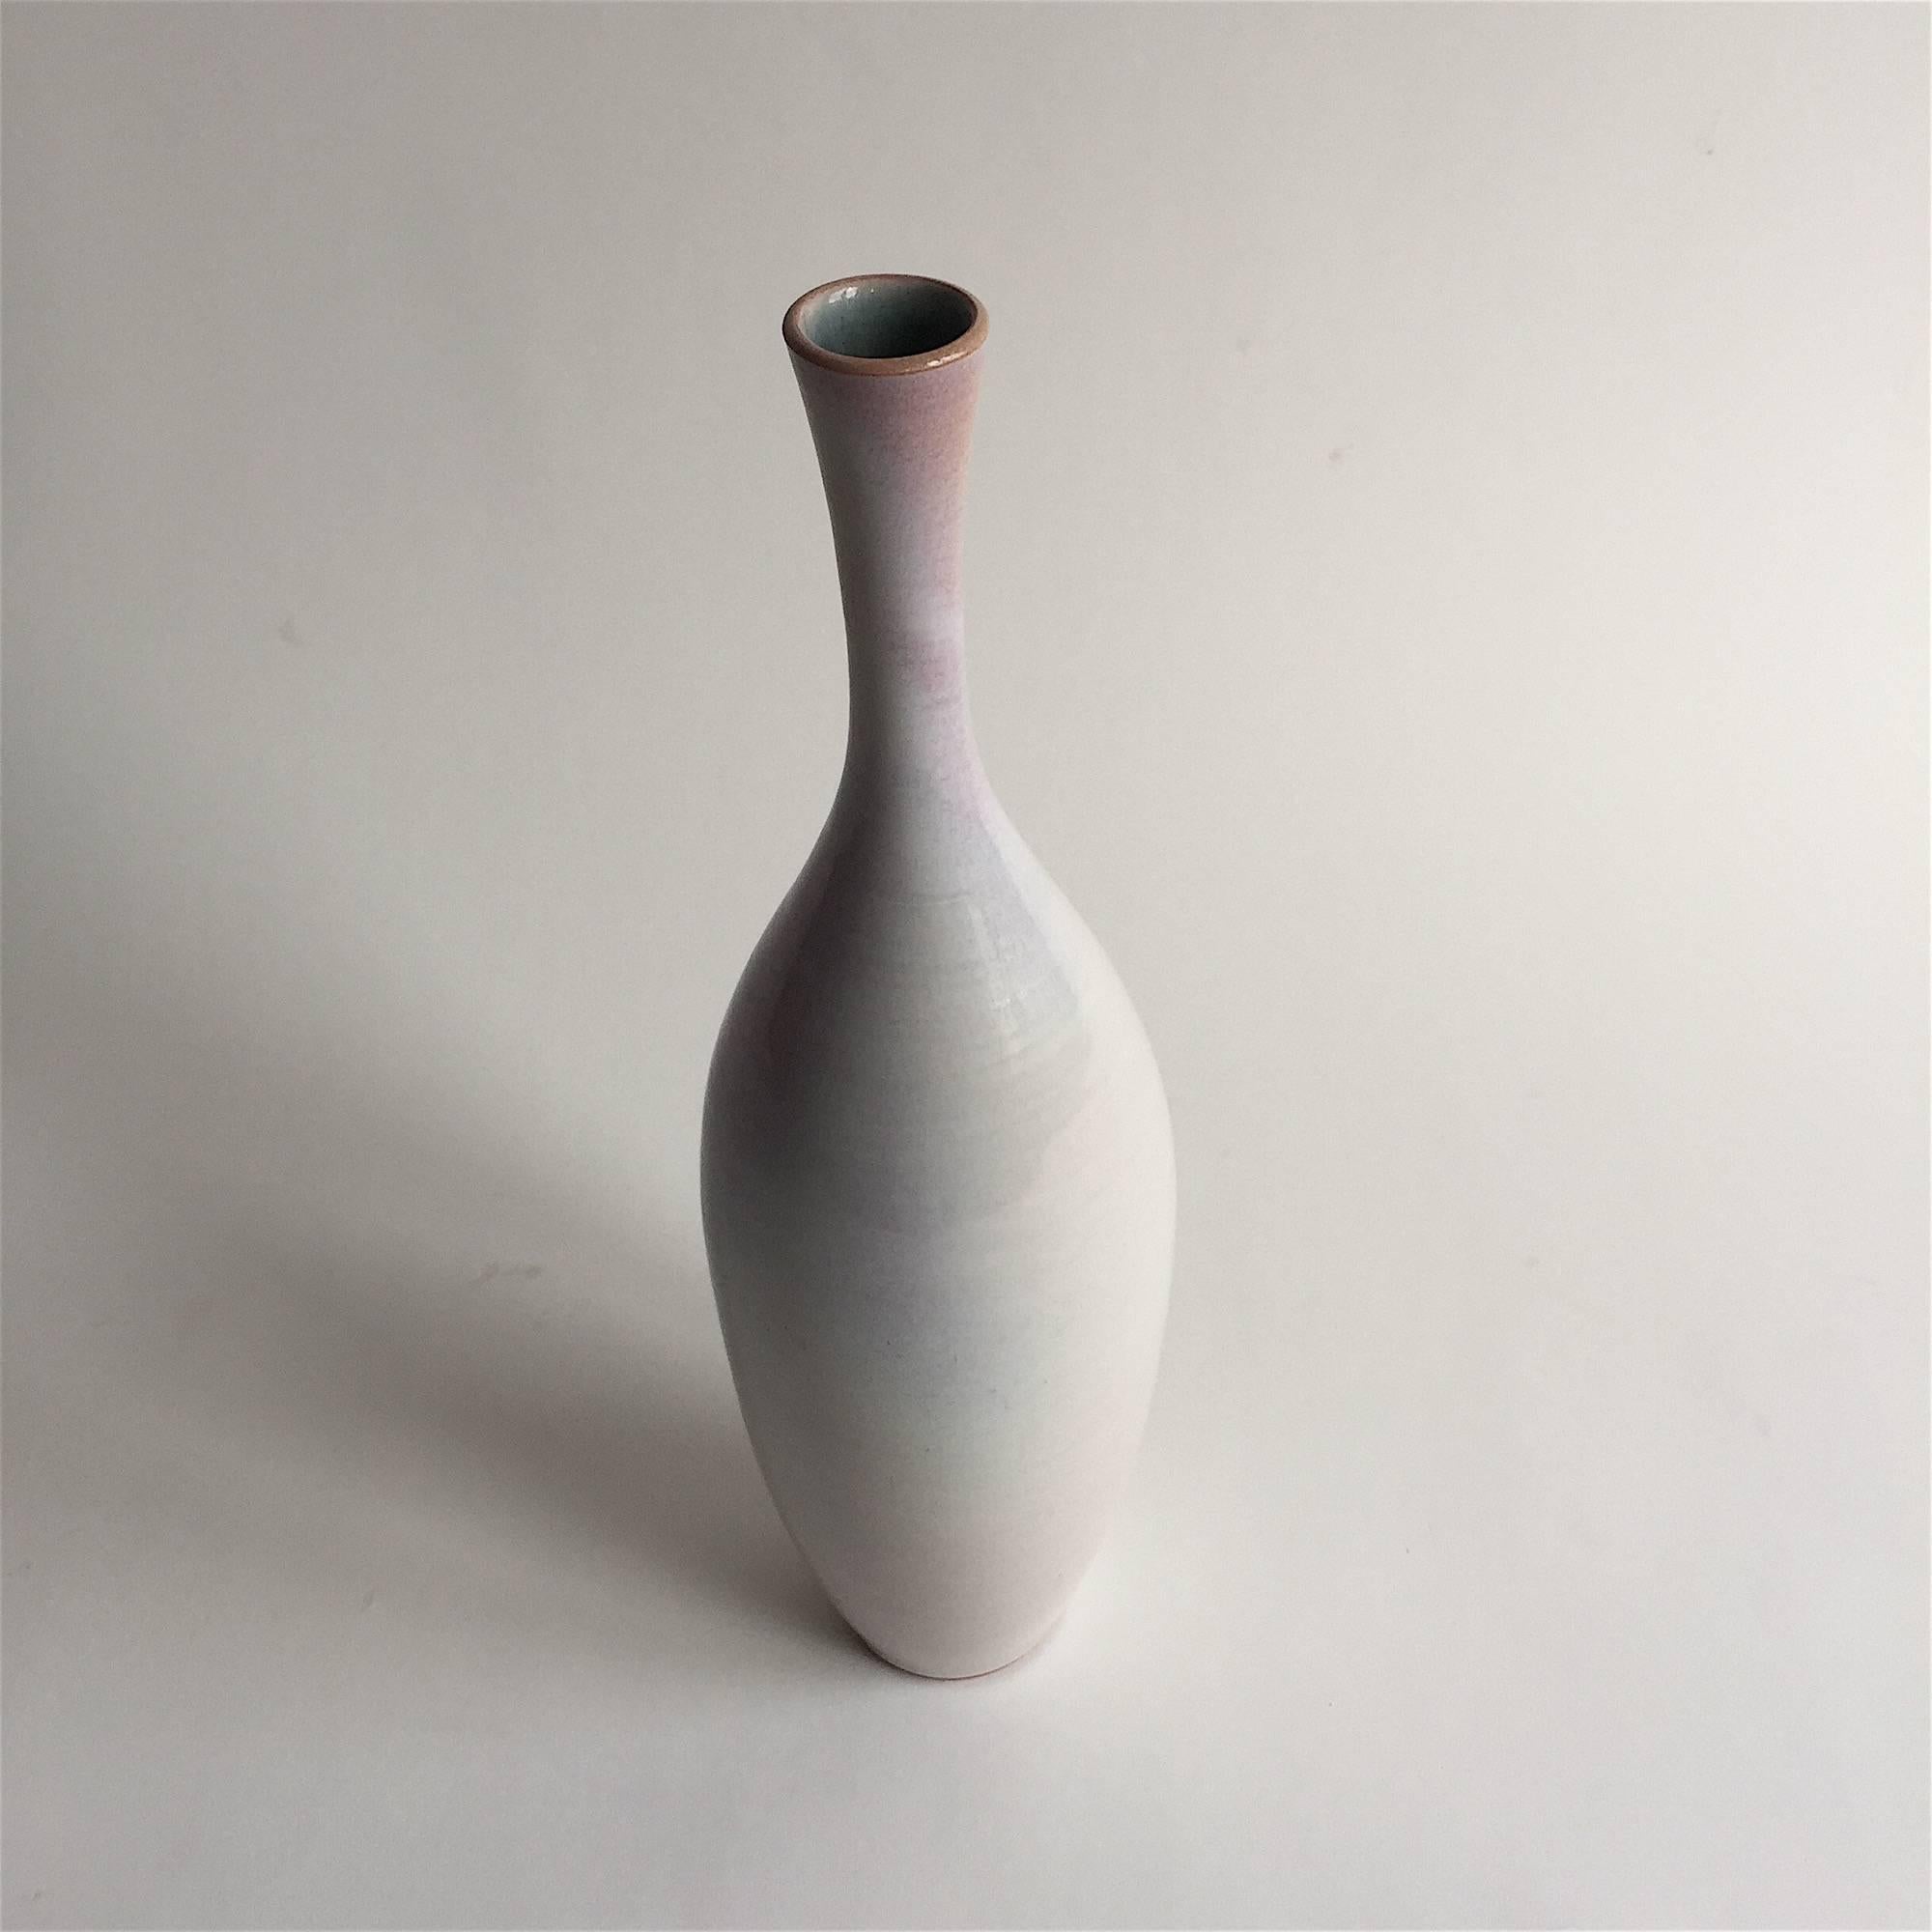 Suzanne Ramié (1907-1974,) France.

Ceramic vase by renowned France artist Suzanne Ramié having a white-purple glaze. Vallauris red Clay. Incised on the bottom with the artist's 